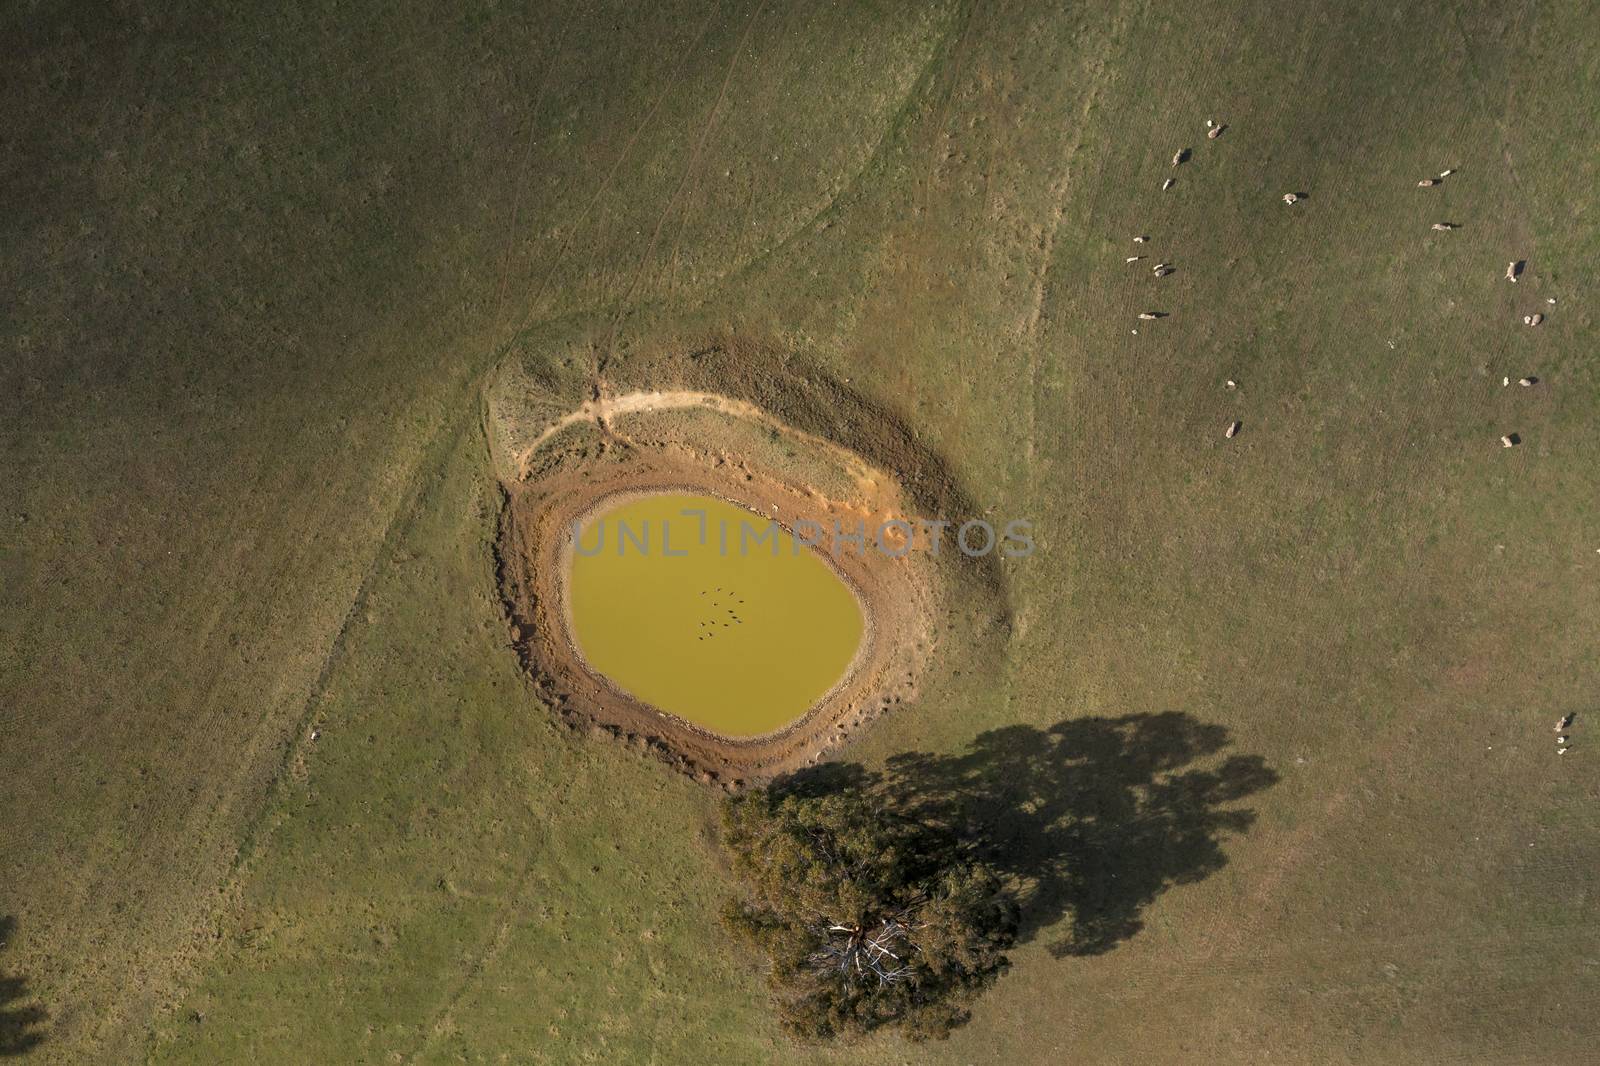 A drought affected agricultural dam in regional Australia by WittkePhotos